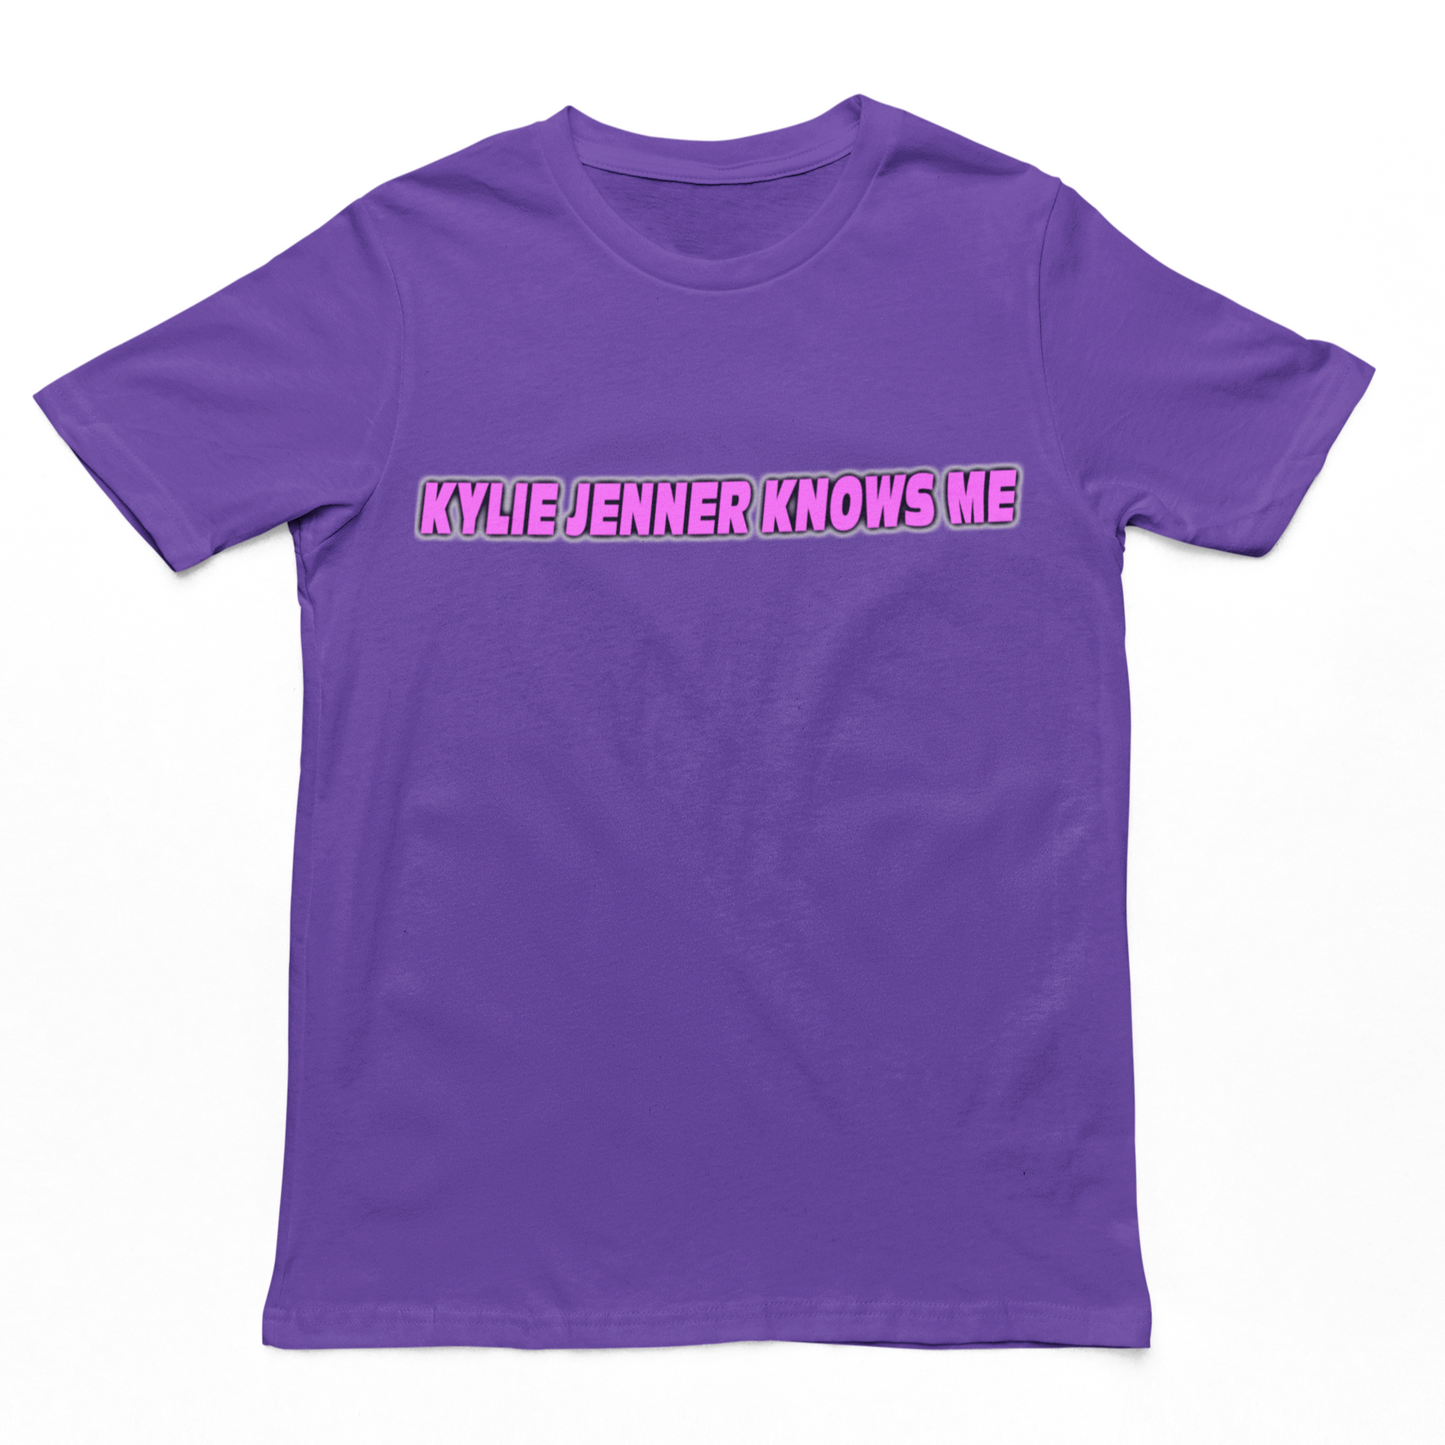 Kylie Jenner Knows Me t-shirt